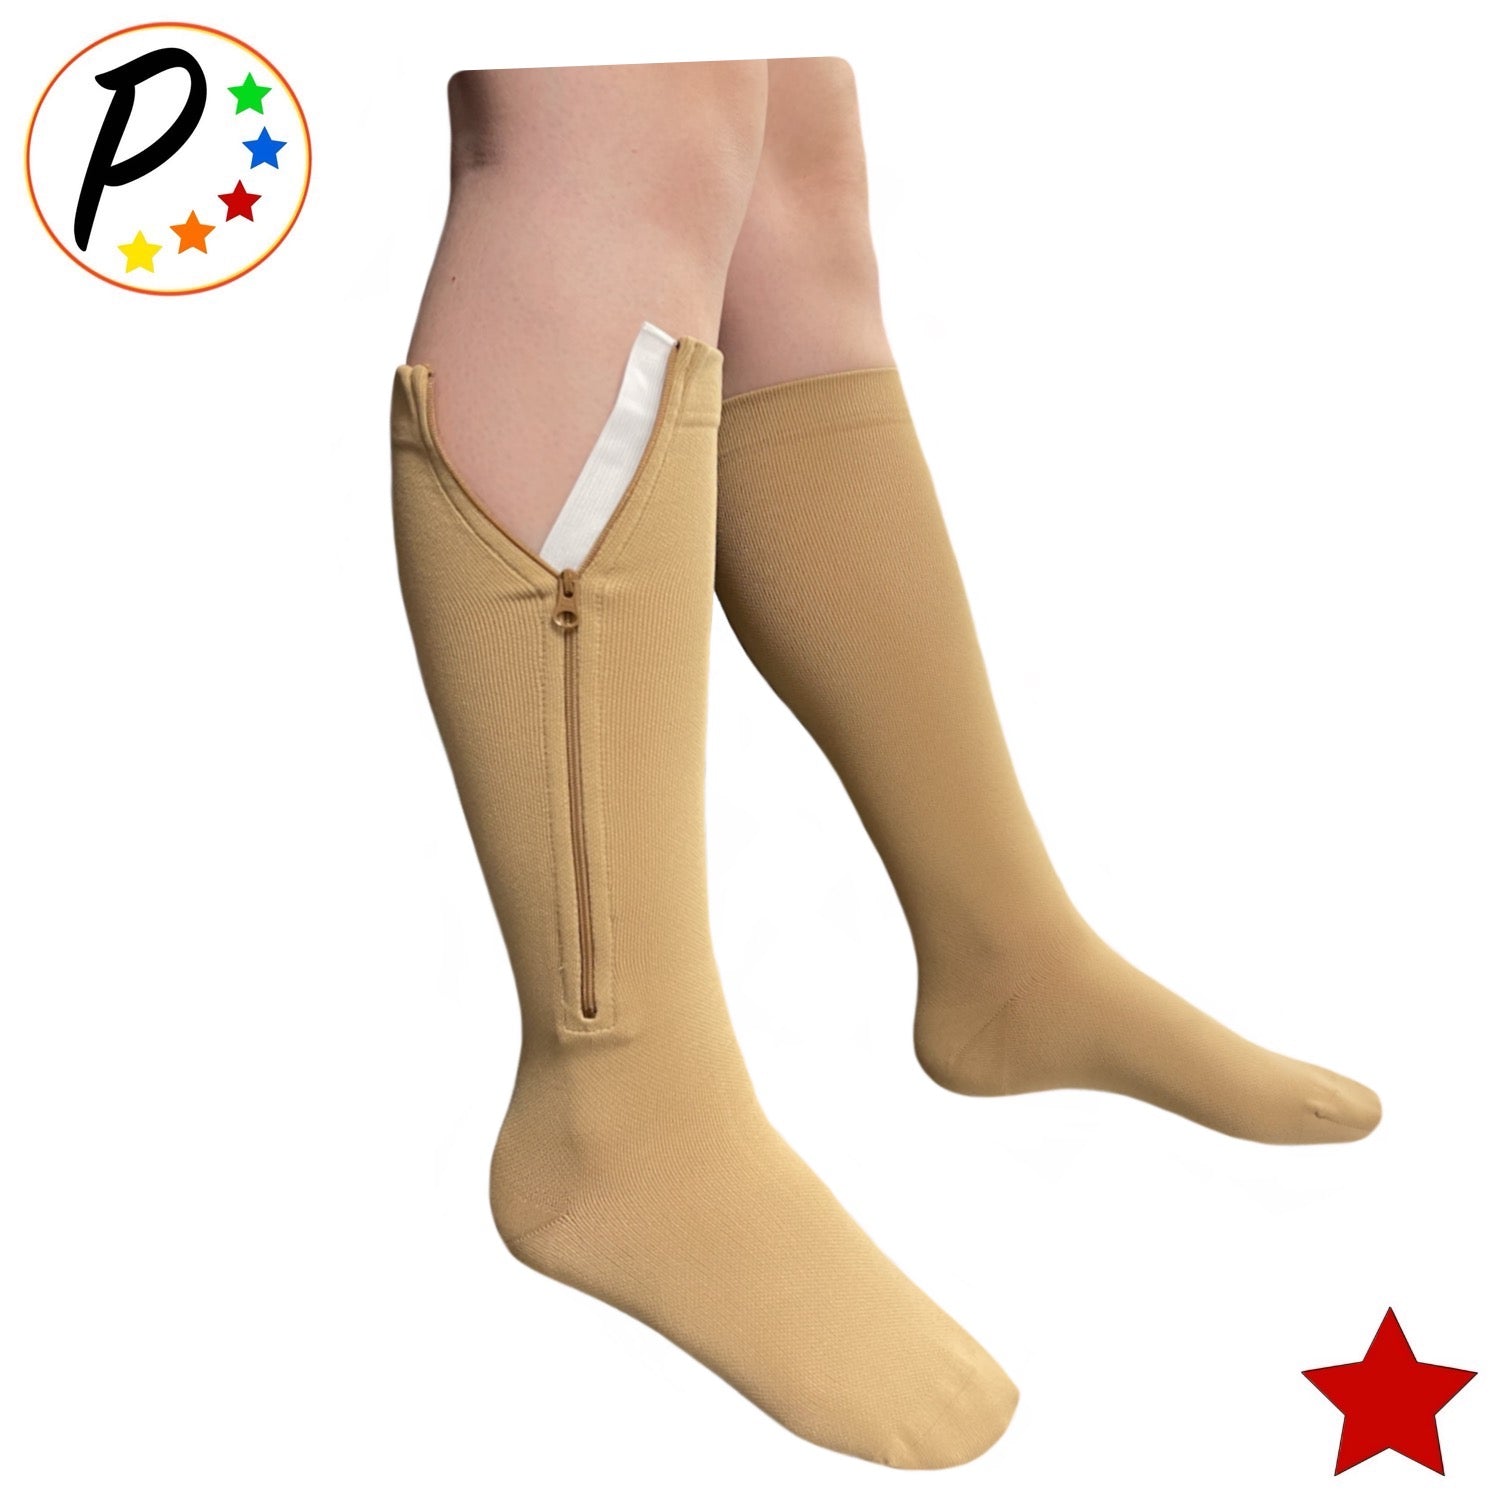 DN ENt Zip socks Compression Socks with Zipper Supports Leg Knee Stockings  Open Toe-1pair Foot Support - Buy DN ENt Zip socks Compression Socks with  Zipper Supports Leg Knee Stockings Open Toe-1pair